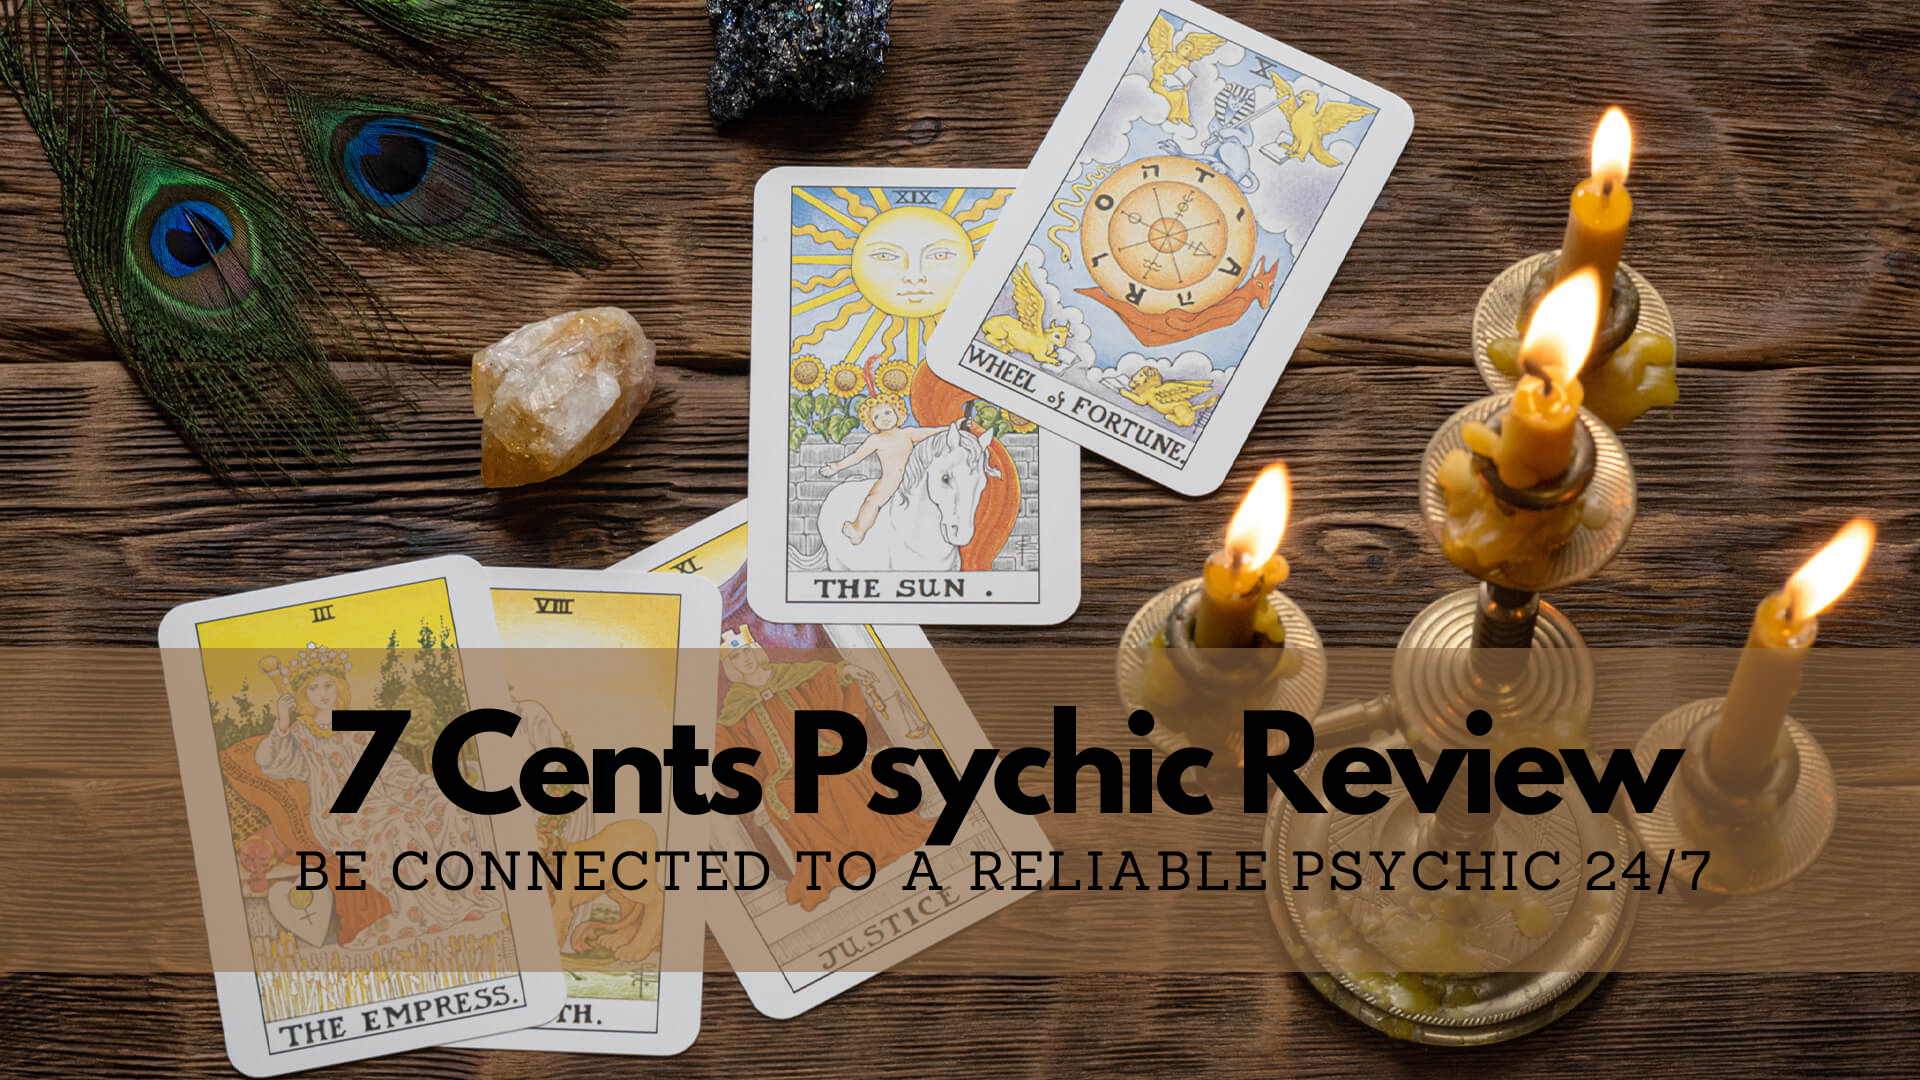 7 Cents Psychic Review - Be Connected To A Reliable Psychic 24/7